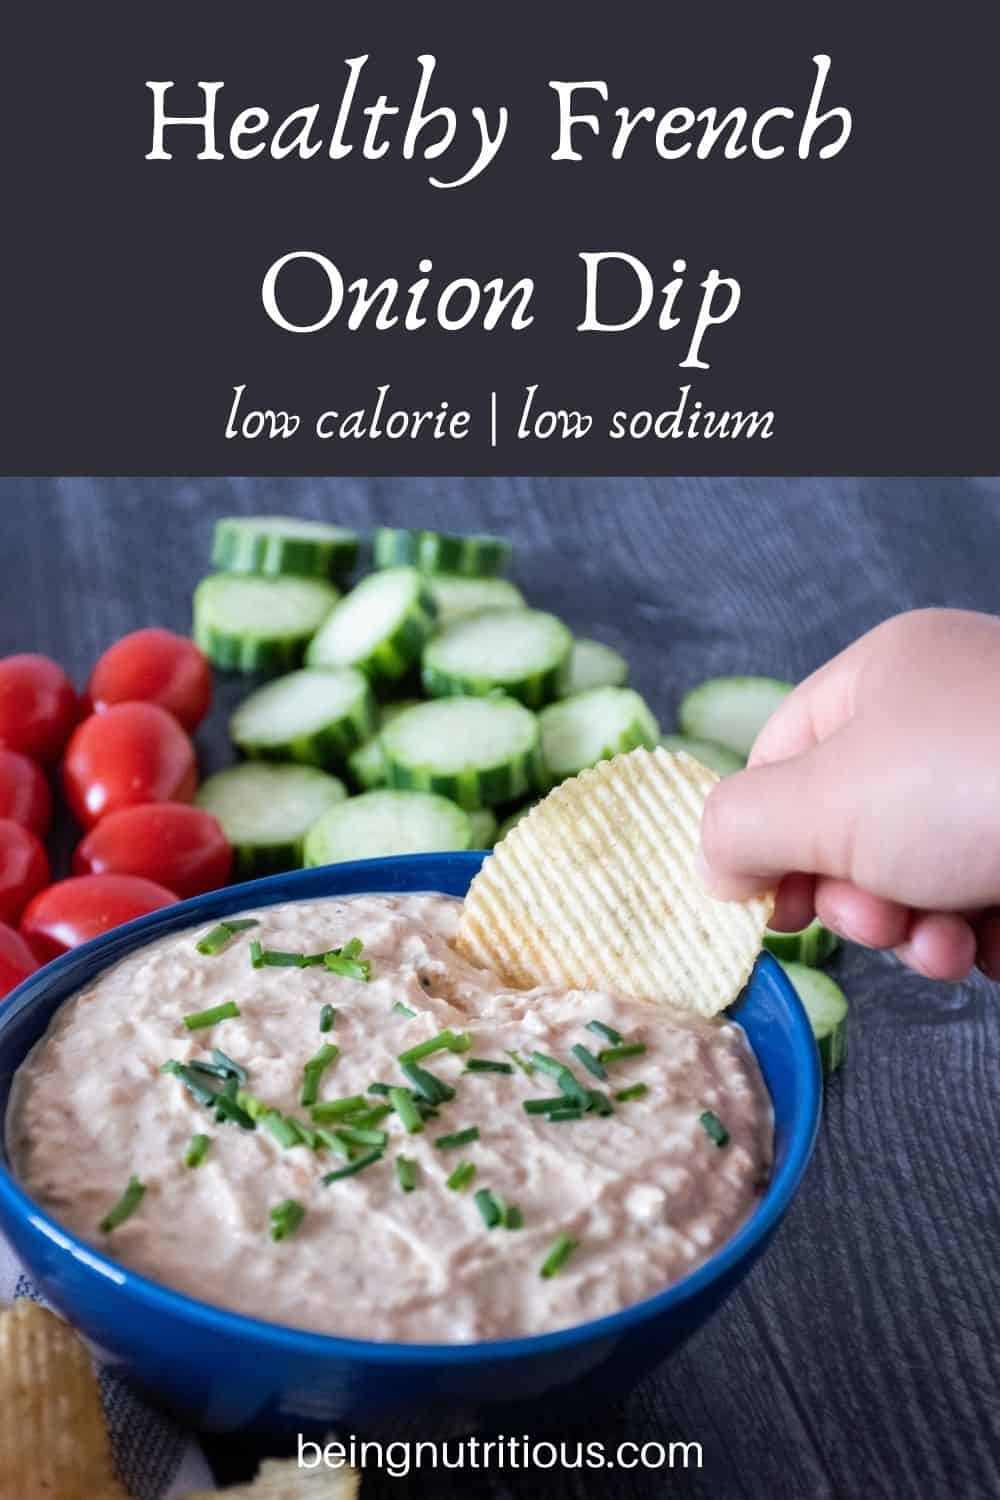 Bowl of dip, surrounded by chips, cucumber slices, and baby tomatoes. Hand holding a chip with dipping it. Text overlay: Healthy French Onion Dip, low calorie, low sodium.